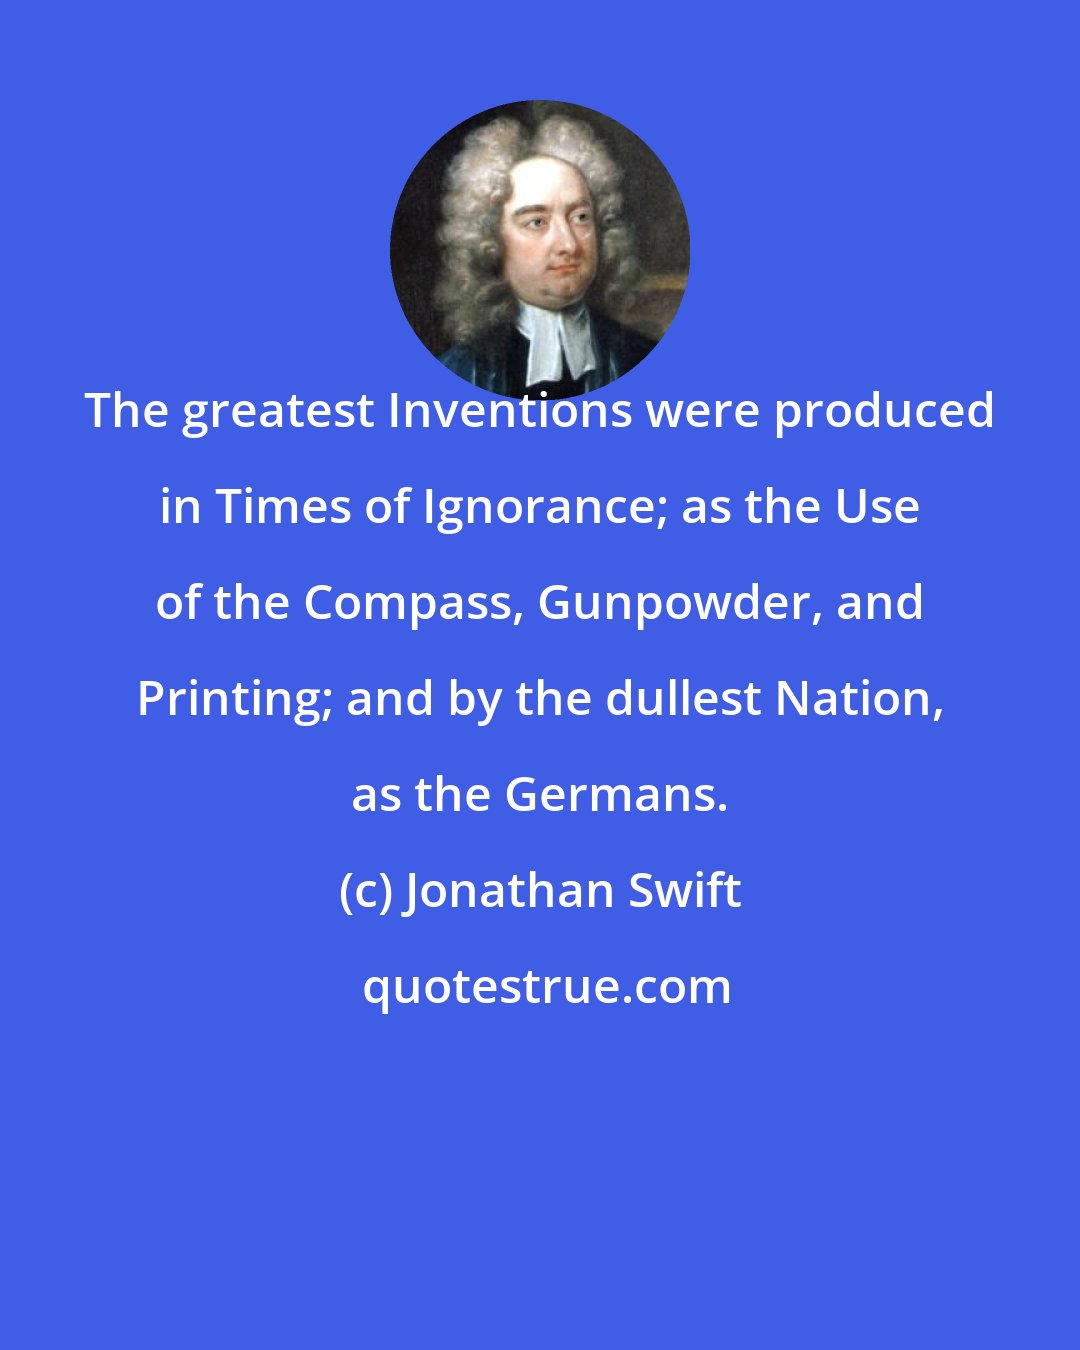 Jonathan Swift: The greatest Inventions were produced in Times of Ignorance; as the Use of the Compass, Gunpowder, and Printing; and by the dullest Nation, as the Germans.